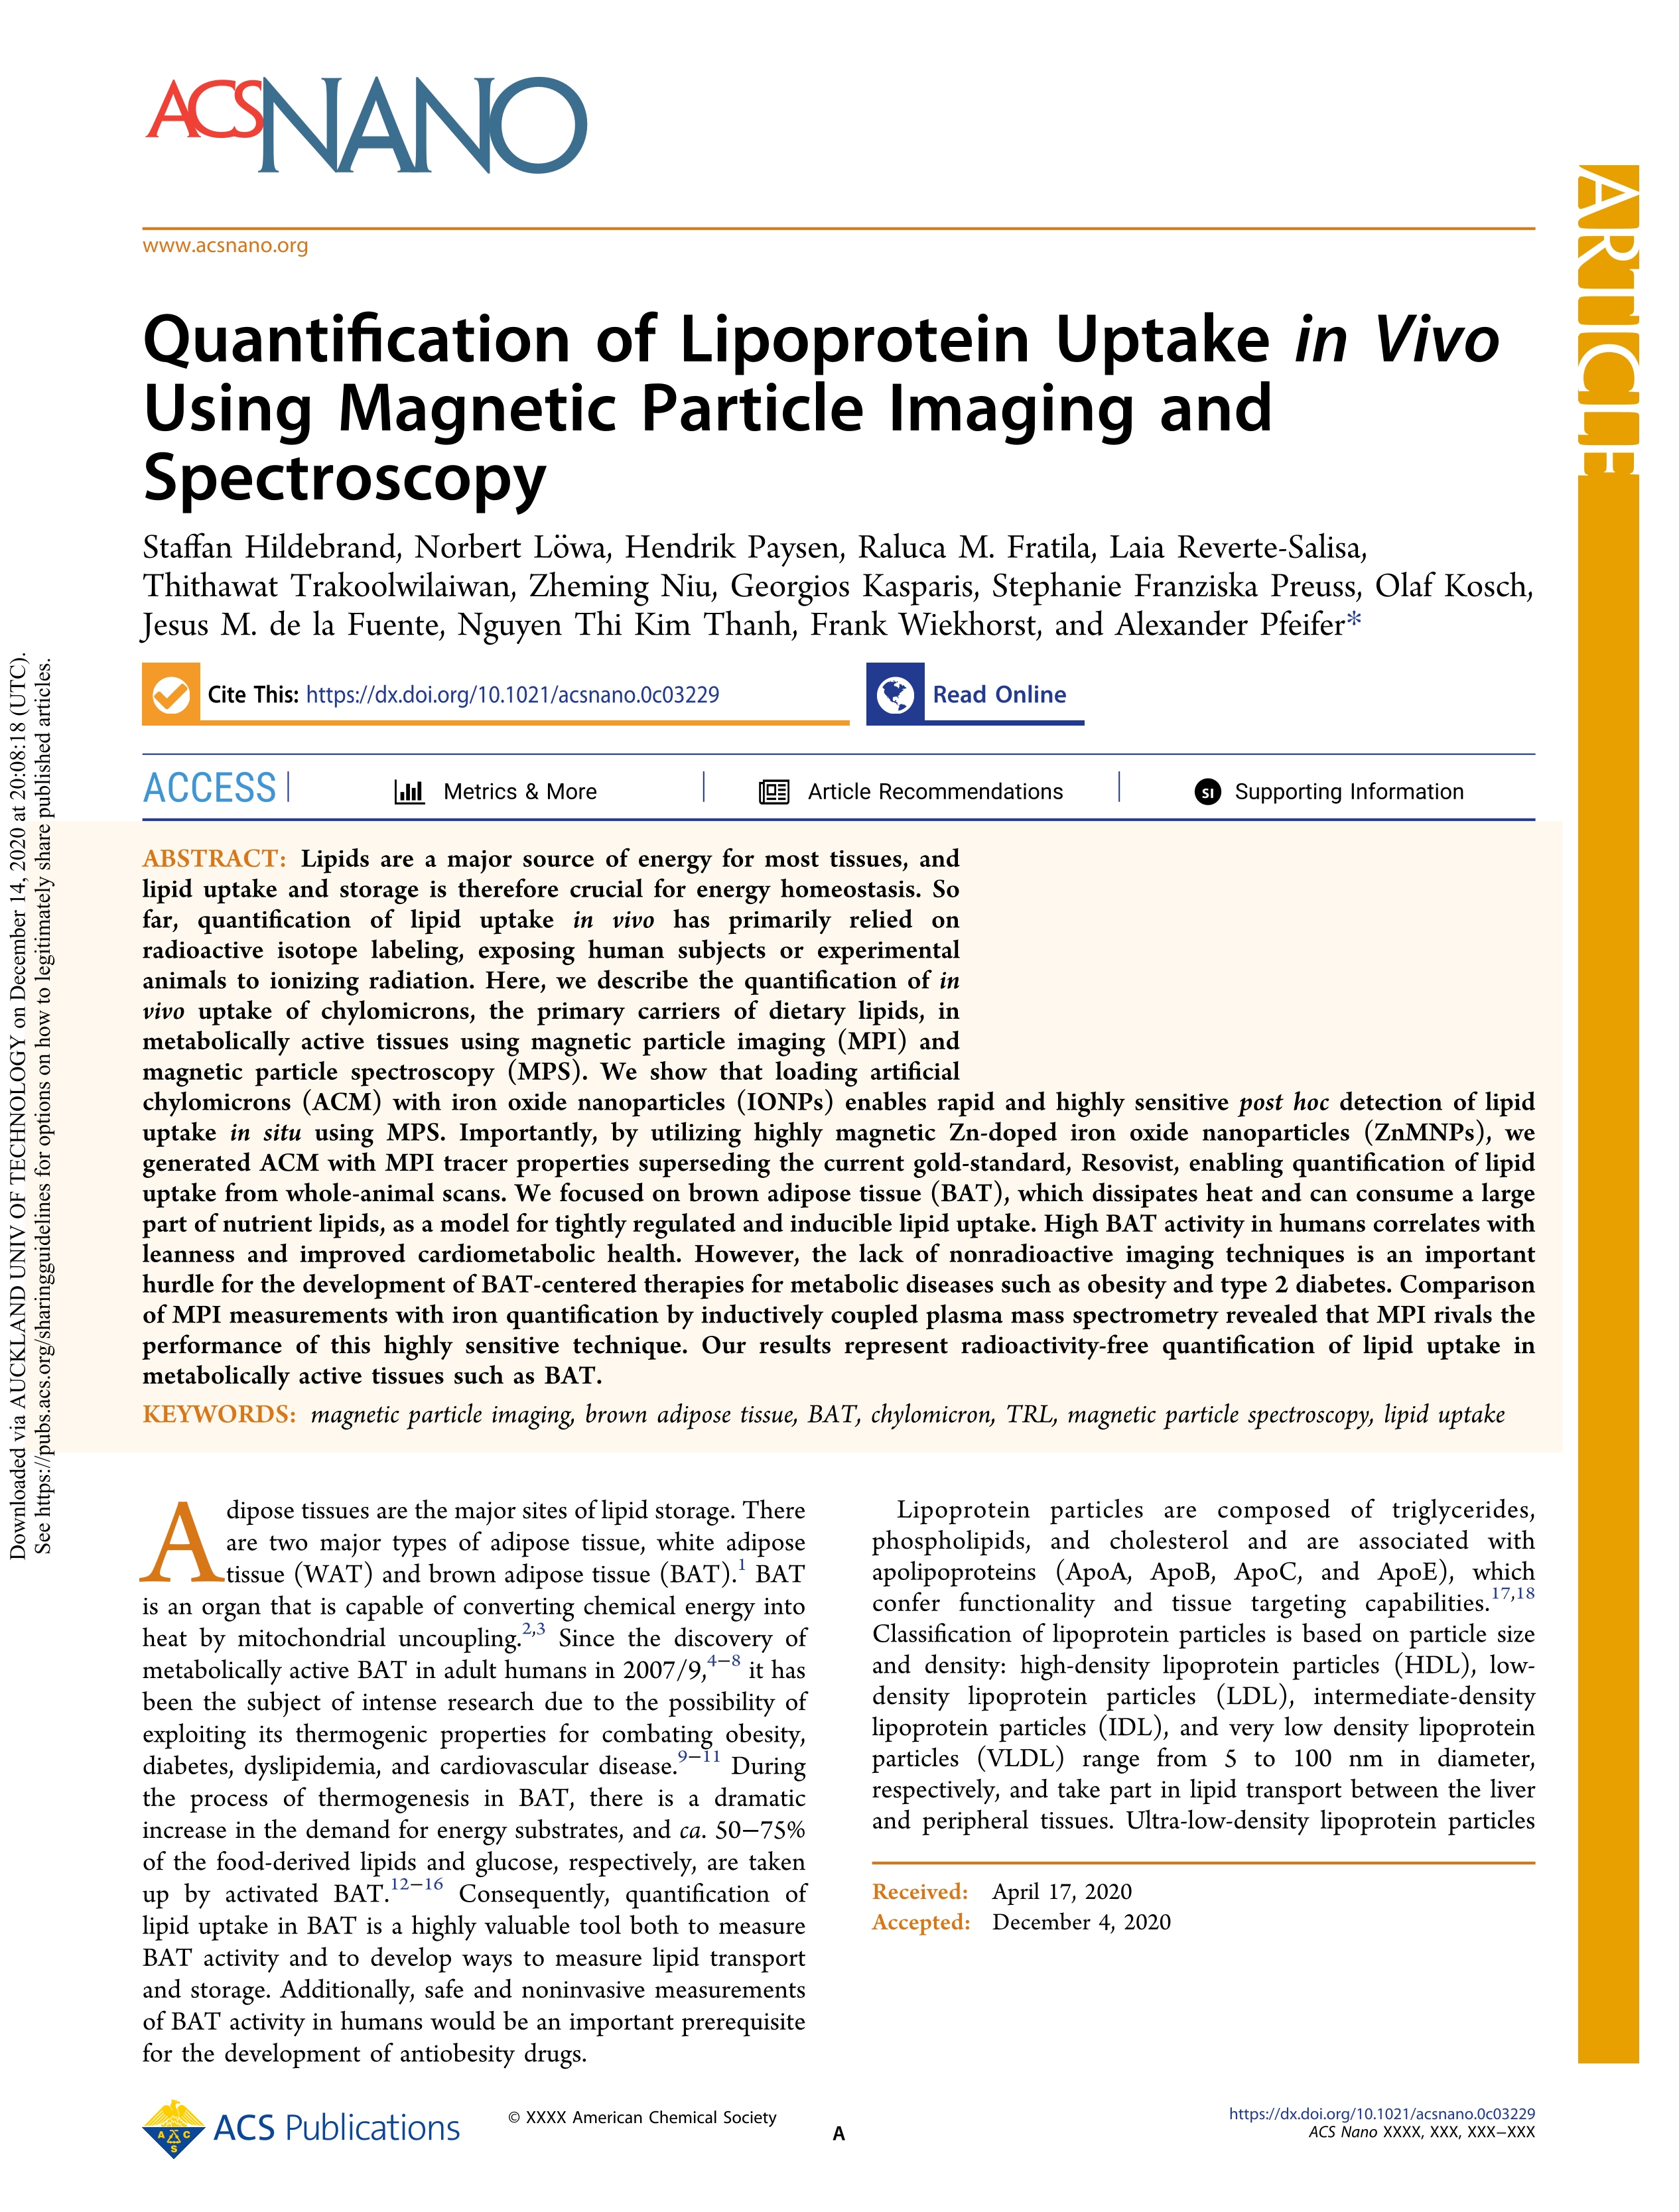 Quantification of Lipoprotein Uptake in Vivo Using Magnetic Particle Imaging and Spectroscopy